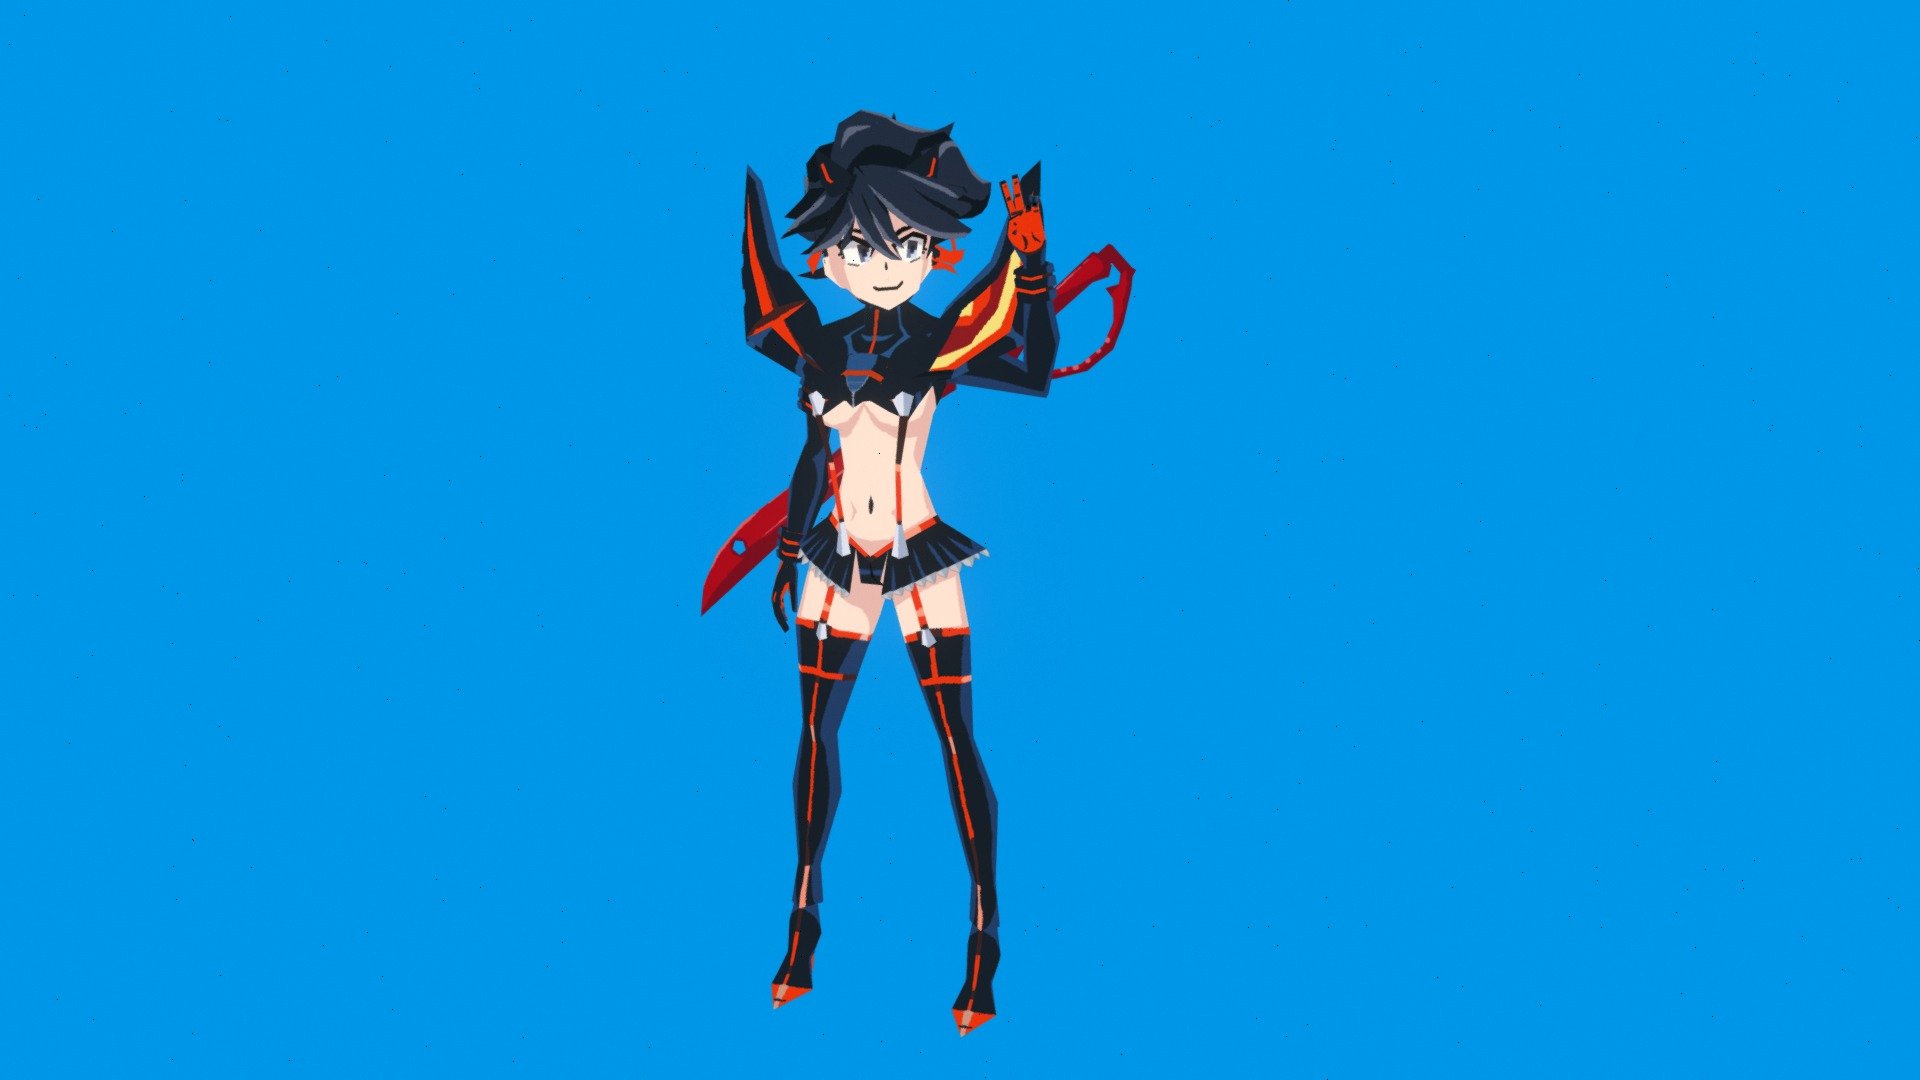 I decided to pay tribute to the brilliant anime kill la kill by making the main character out of it, Ryuko Matoy!

If you want to order something like this, write to me in discord RETENEIZER#0454

My portfolio https://www.artstation.com/artwork/YKv1qq - Ryuko Matoi - 3D model by RETENEIZER (@darksars) 3d model